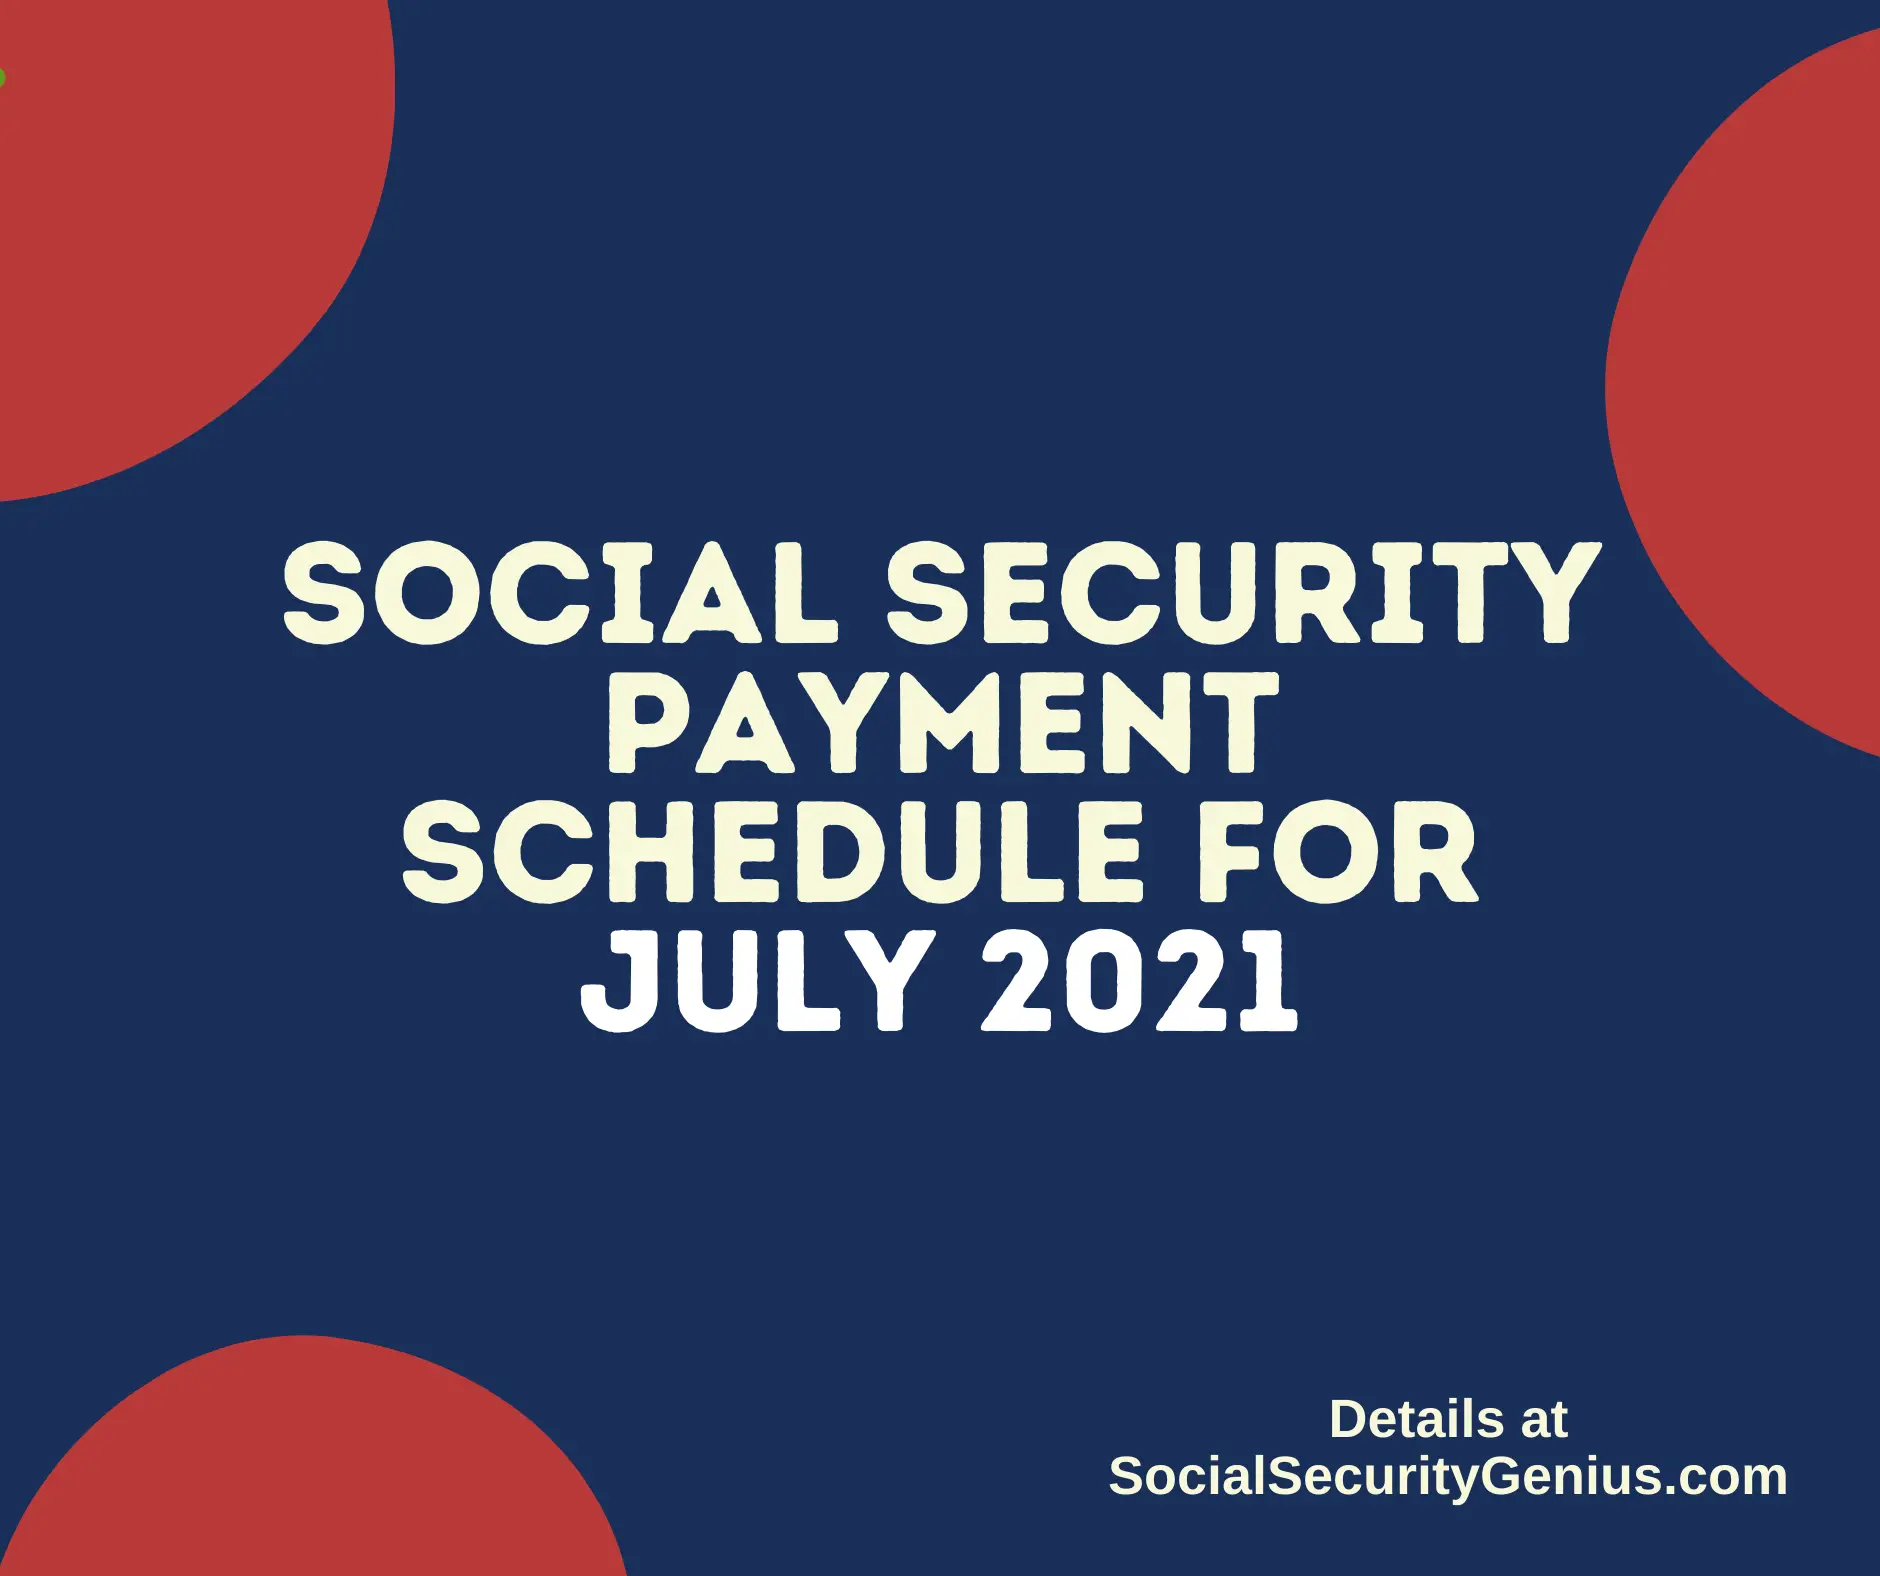 "Social Security Payment Schedule July 2021"